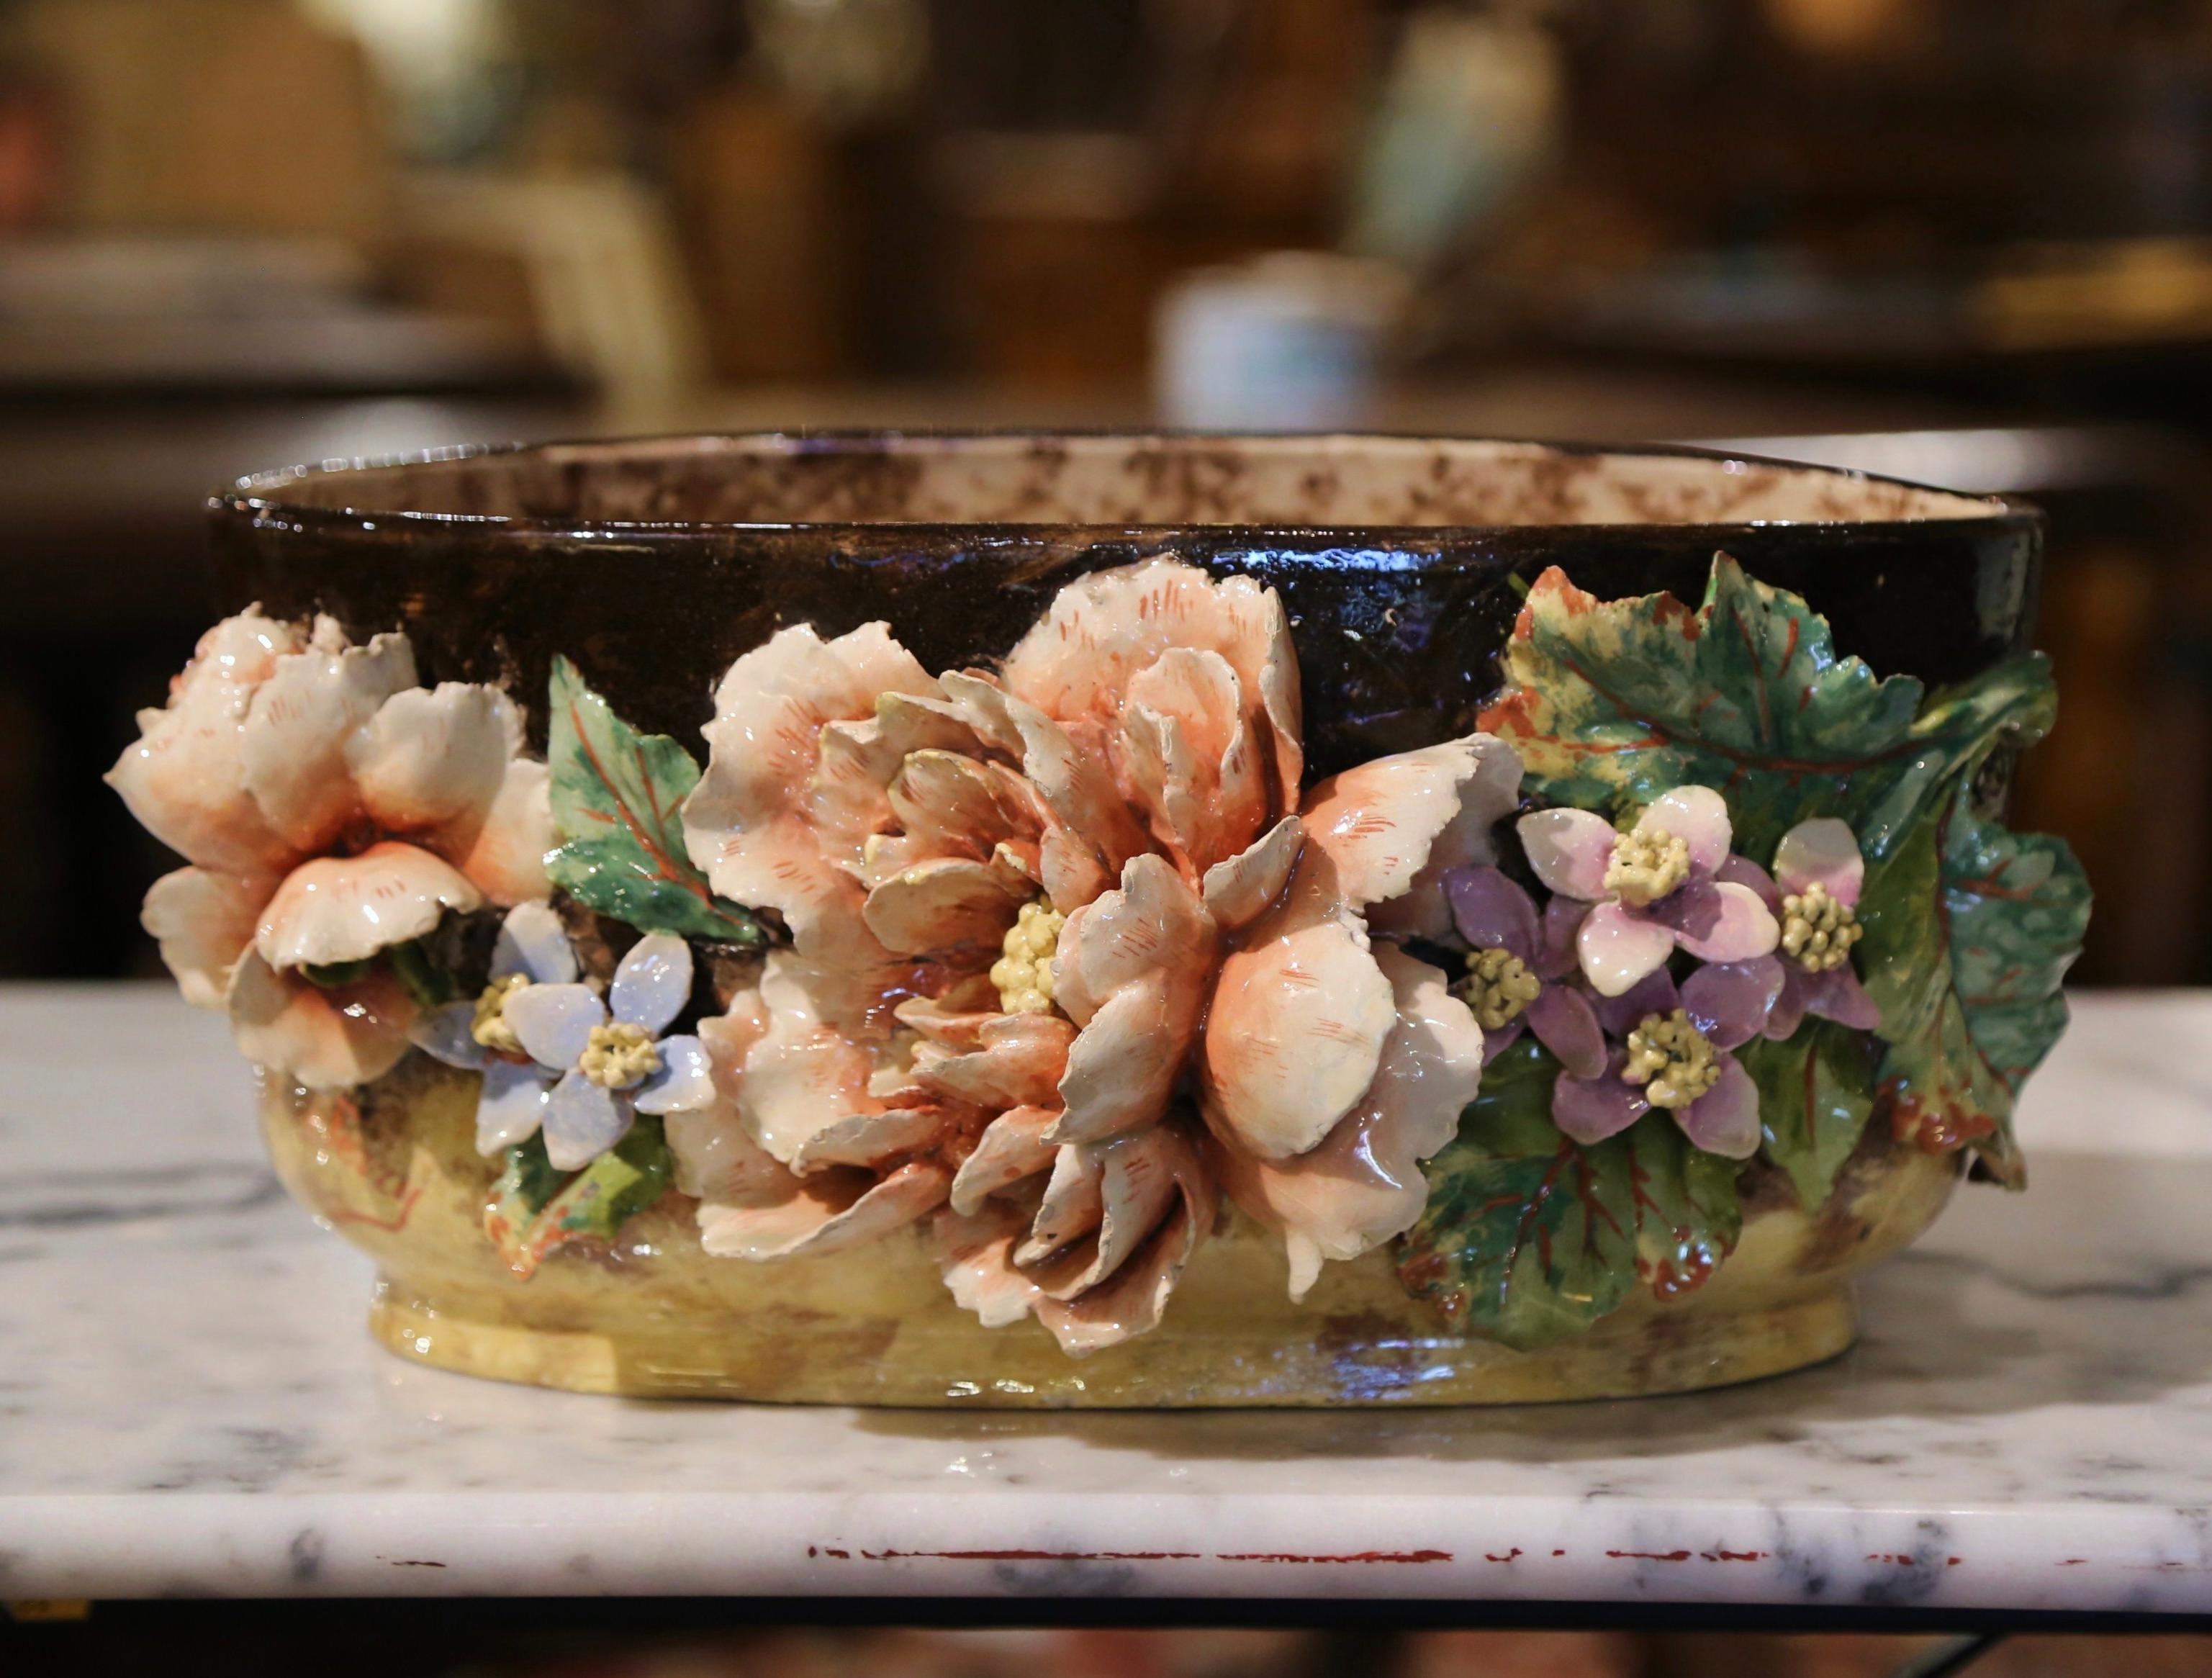 This colorful hand painted Majolica planter was sculpted in Montigny sur Loing, France, circa 1880. Oval in shape, the ceramic jardinière features floral and leaf decor in high relief all around. The colorful flowers are hand painted in the pink,